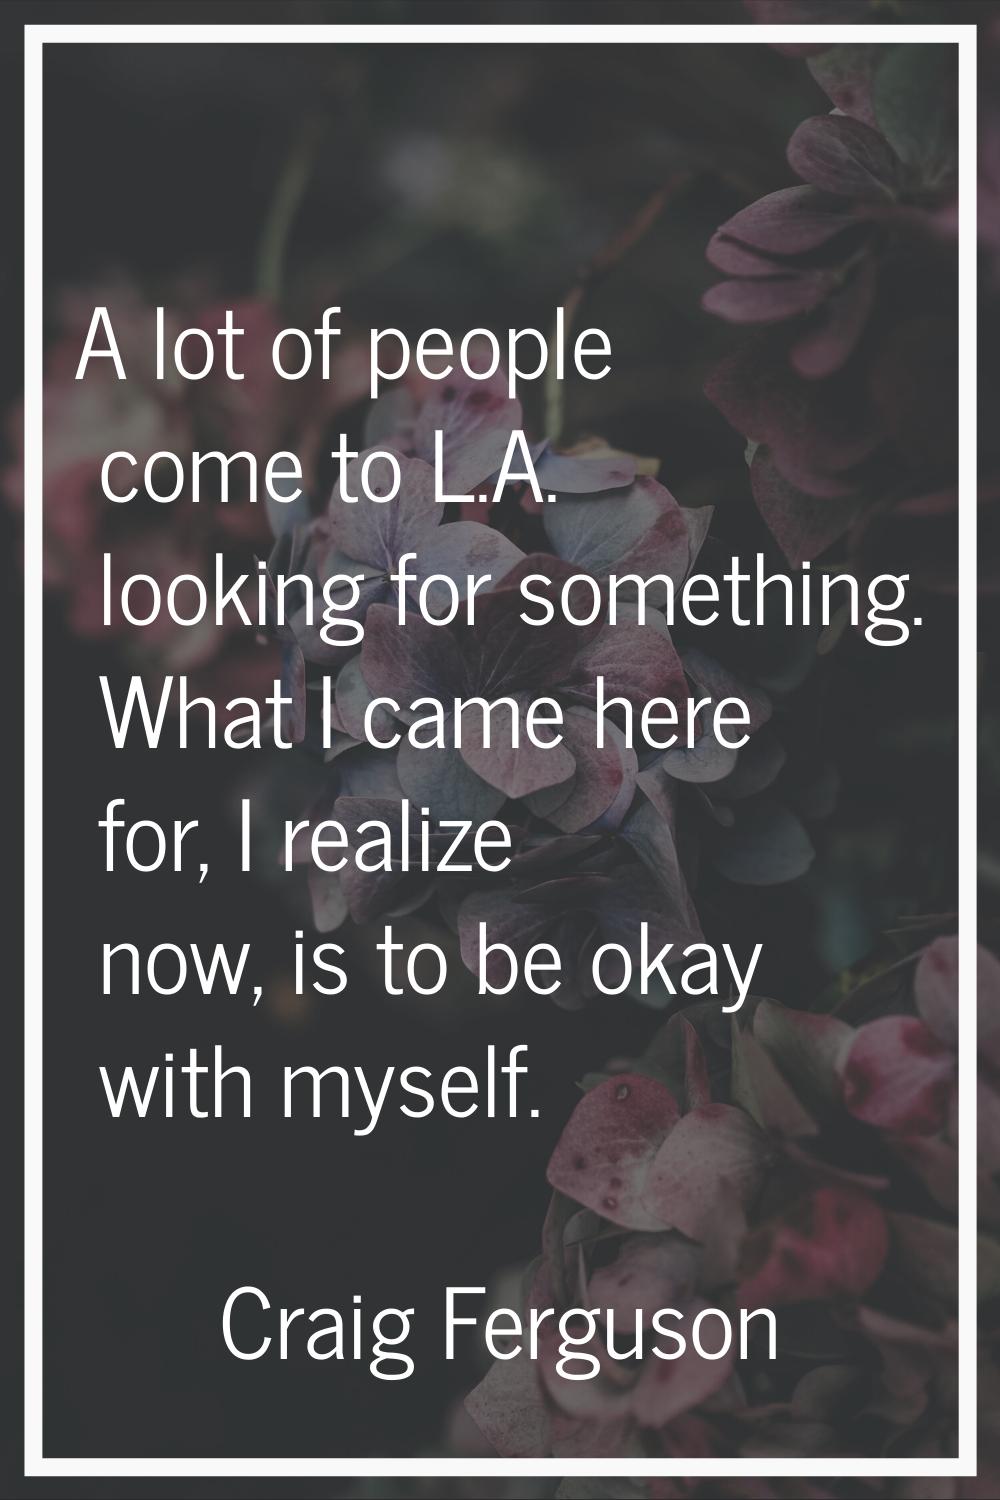 A lot of people come to L.A. looking for something. What I came here for, I realize now, is to be o